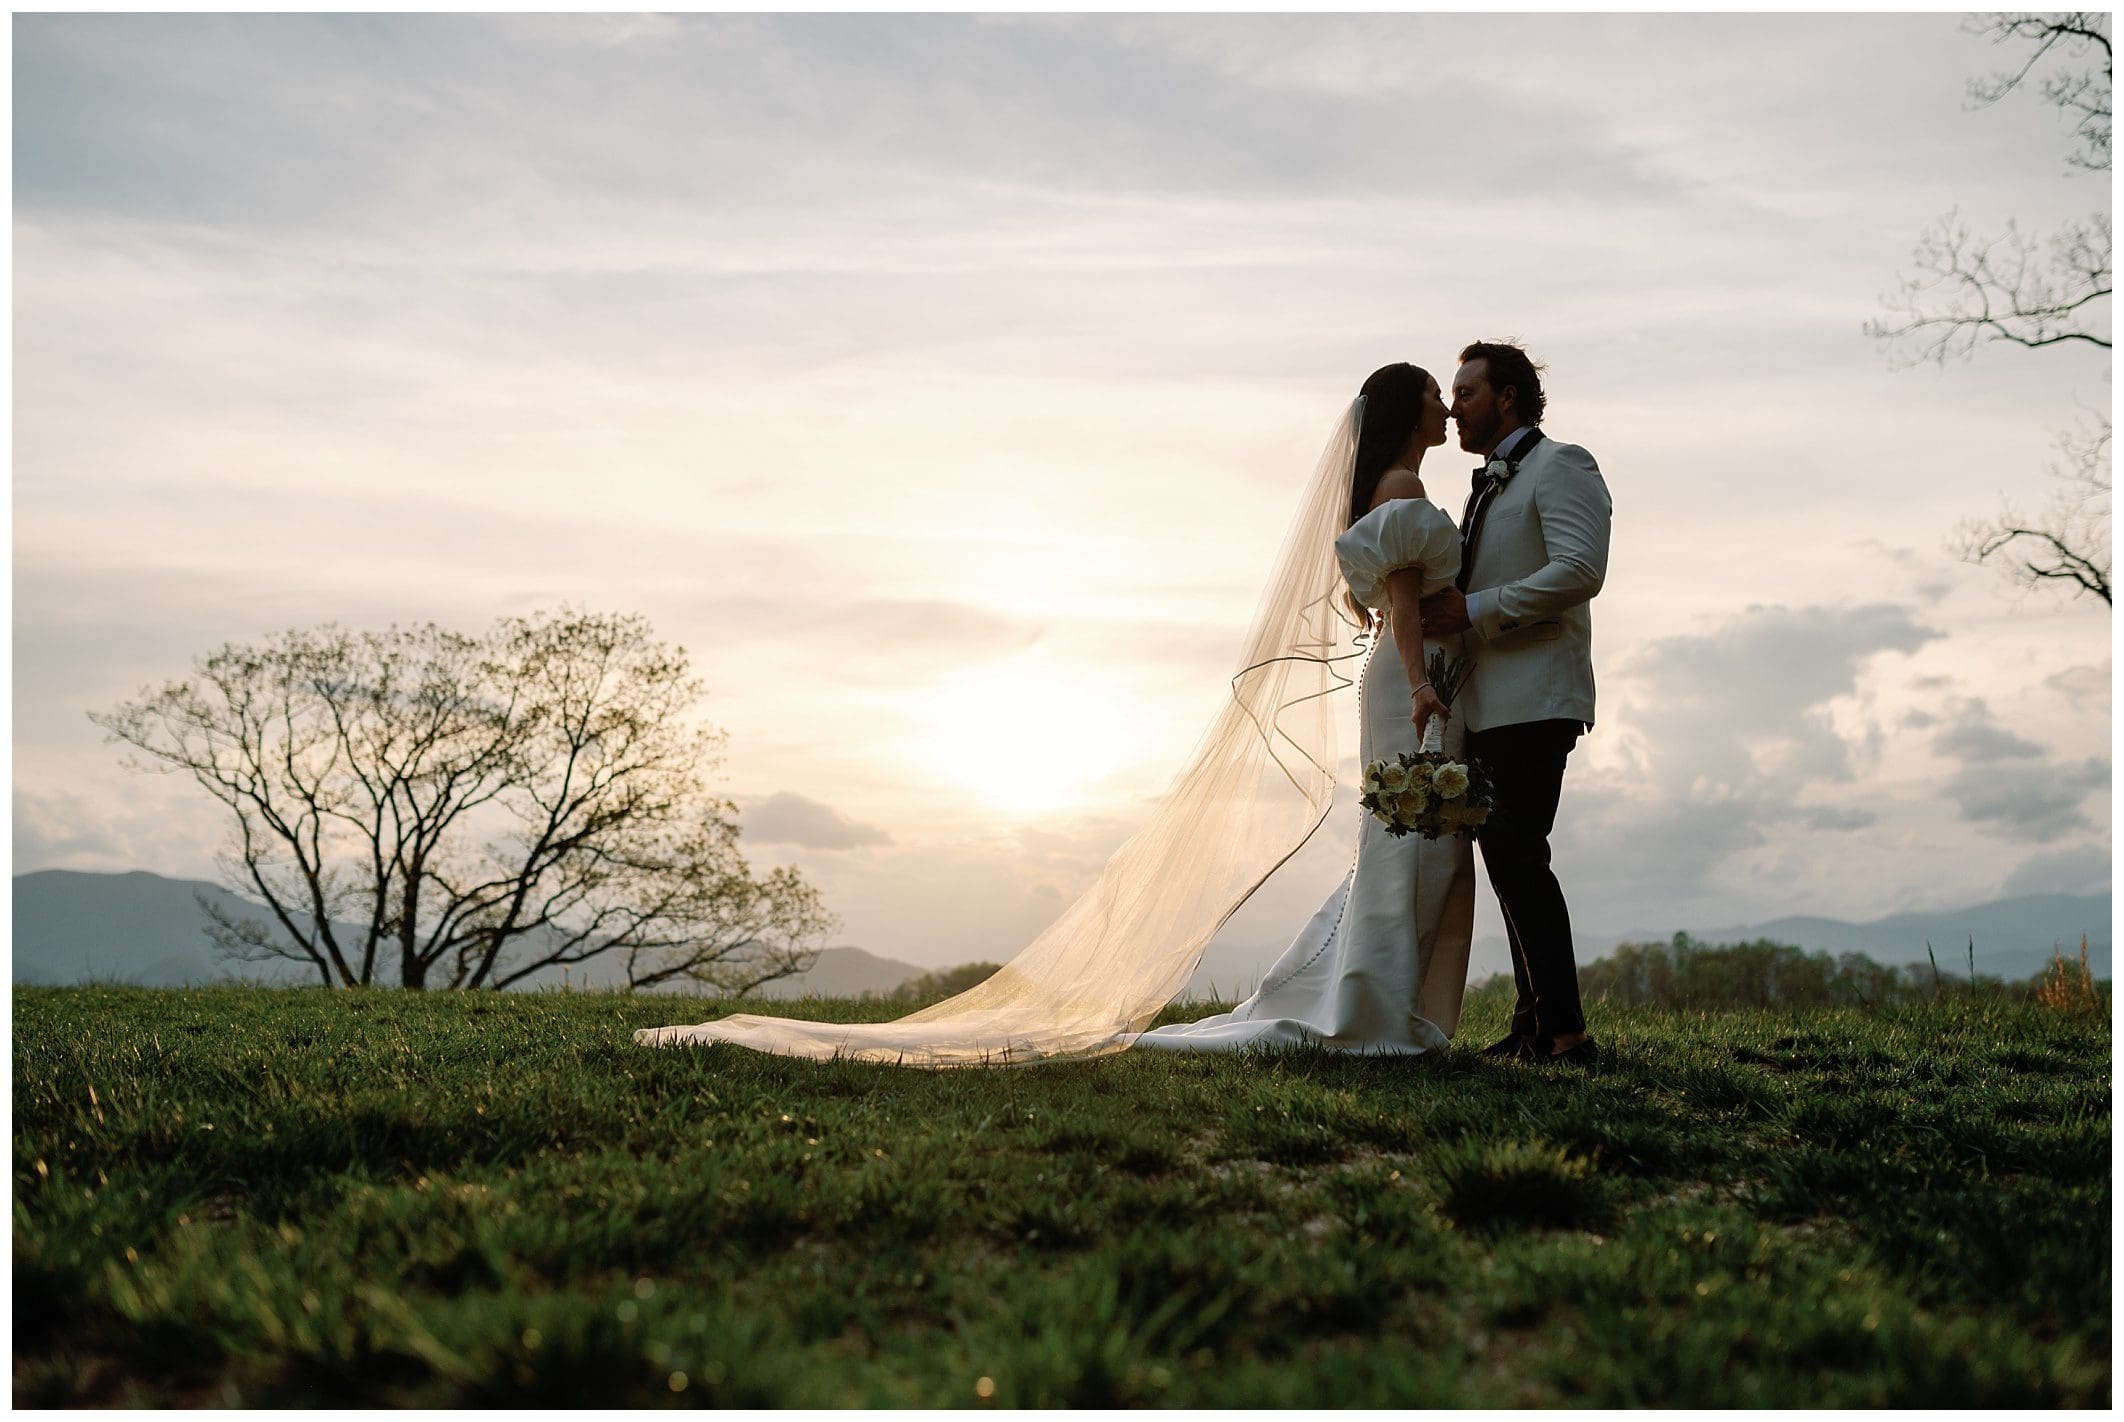 A bride and groom stand close on a grassy hill at sunset, her veil flowing, with mountains and a soft sky in the background.